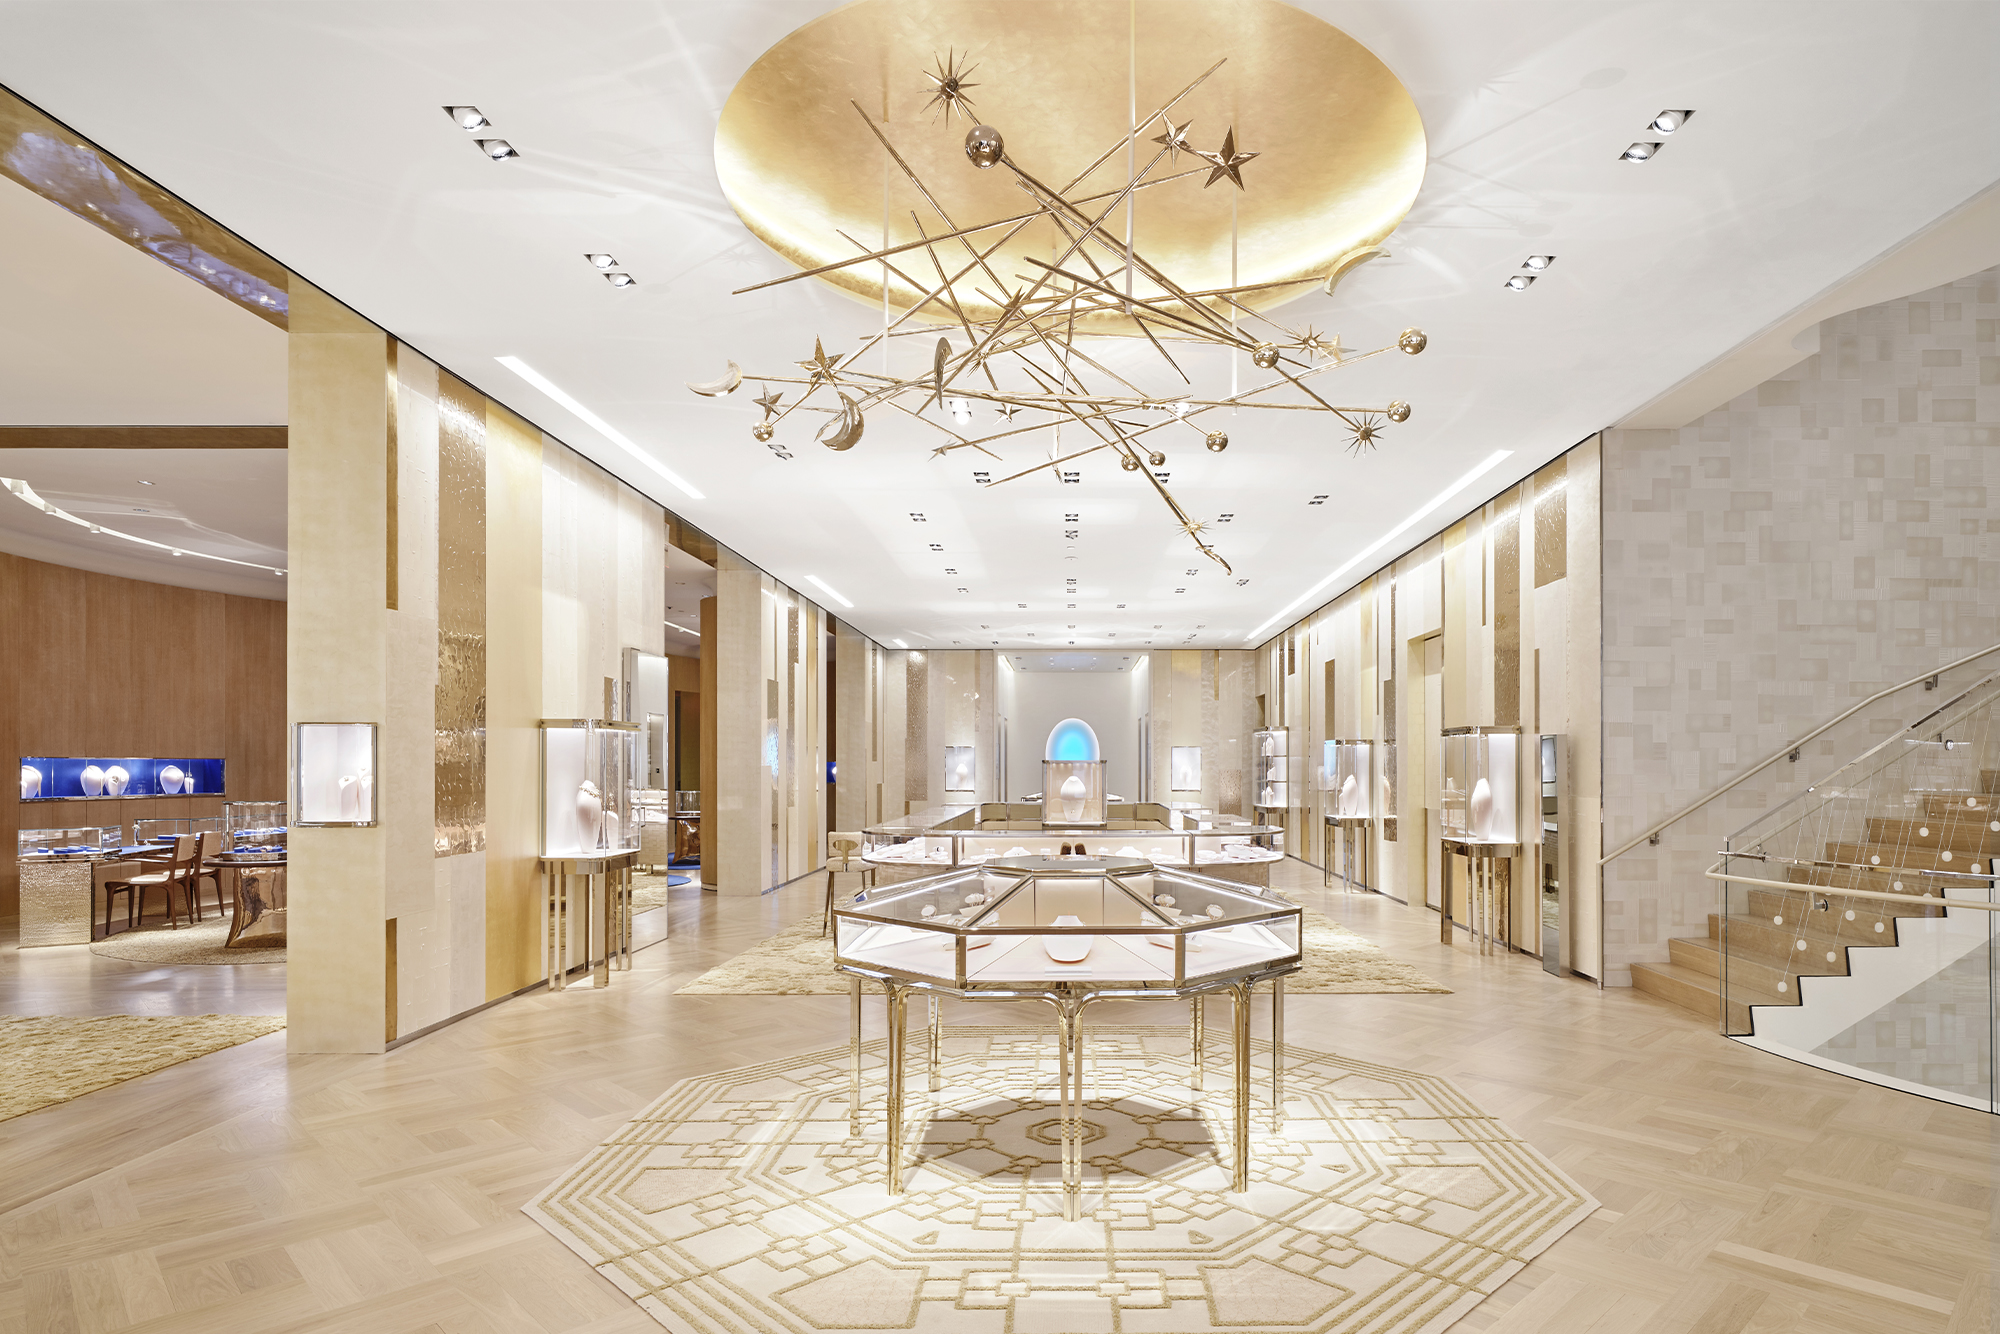 Tiffany & Co. The Landmark interior gold tiled floor with ceiling hanging